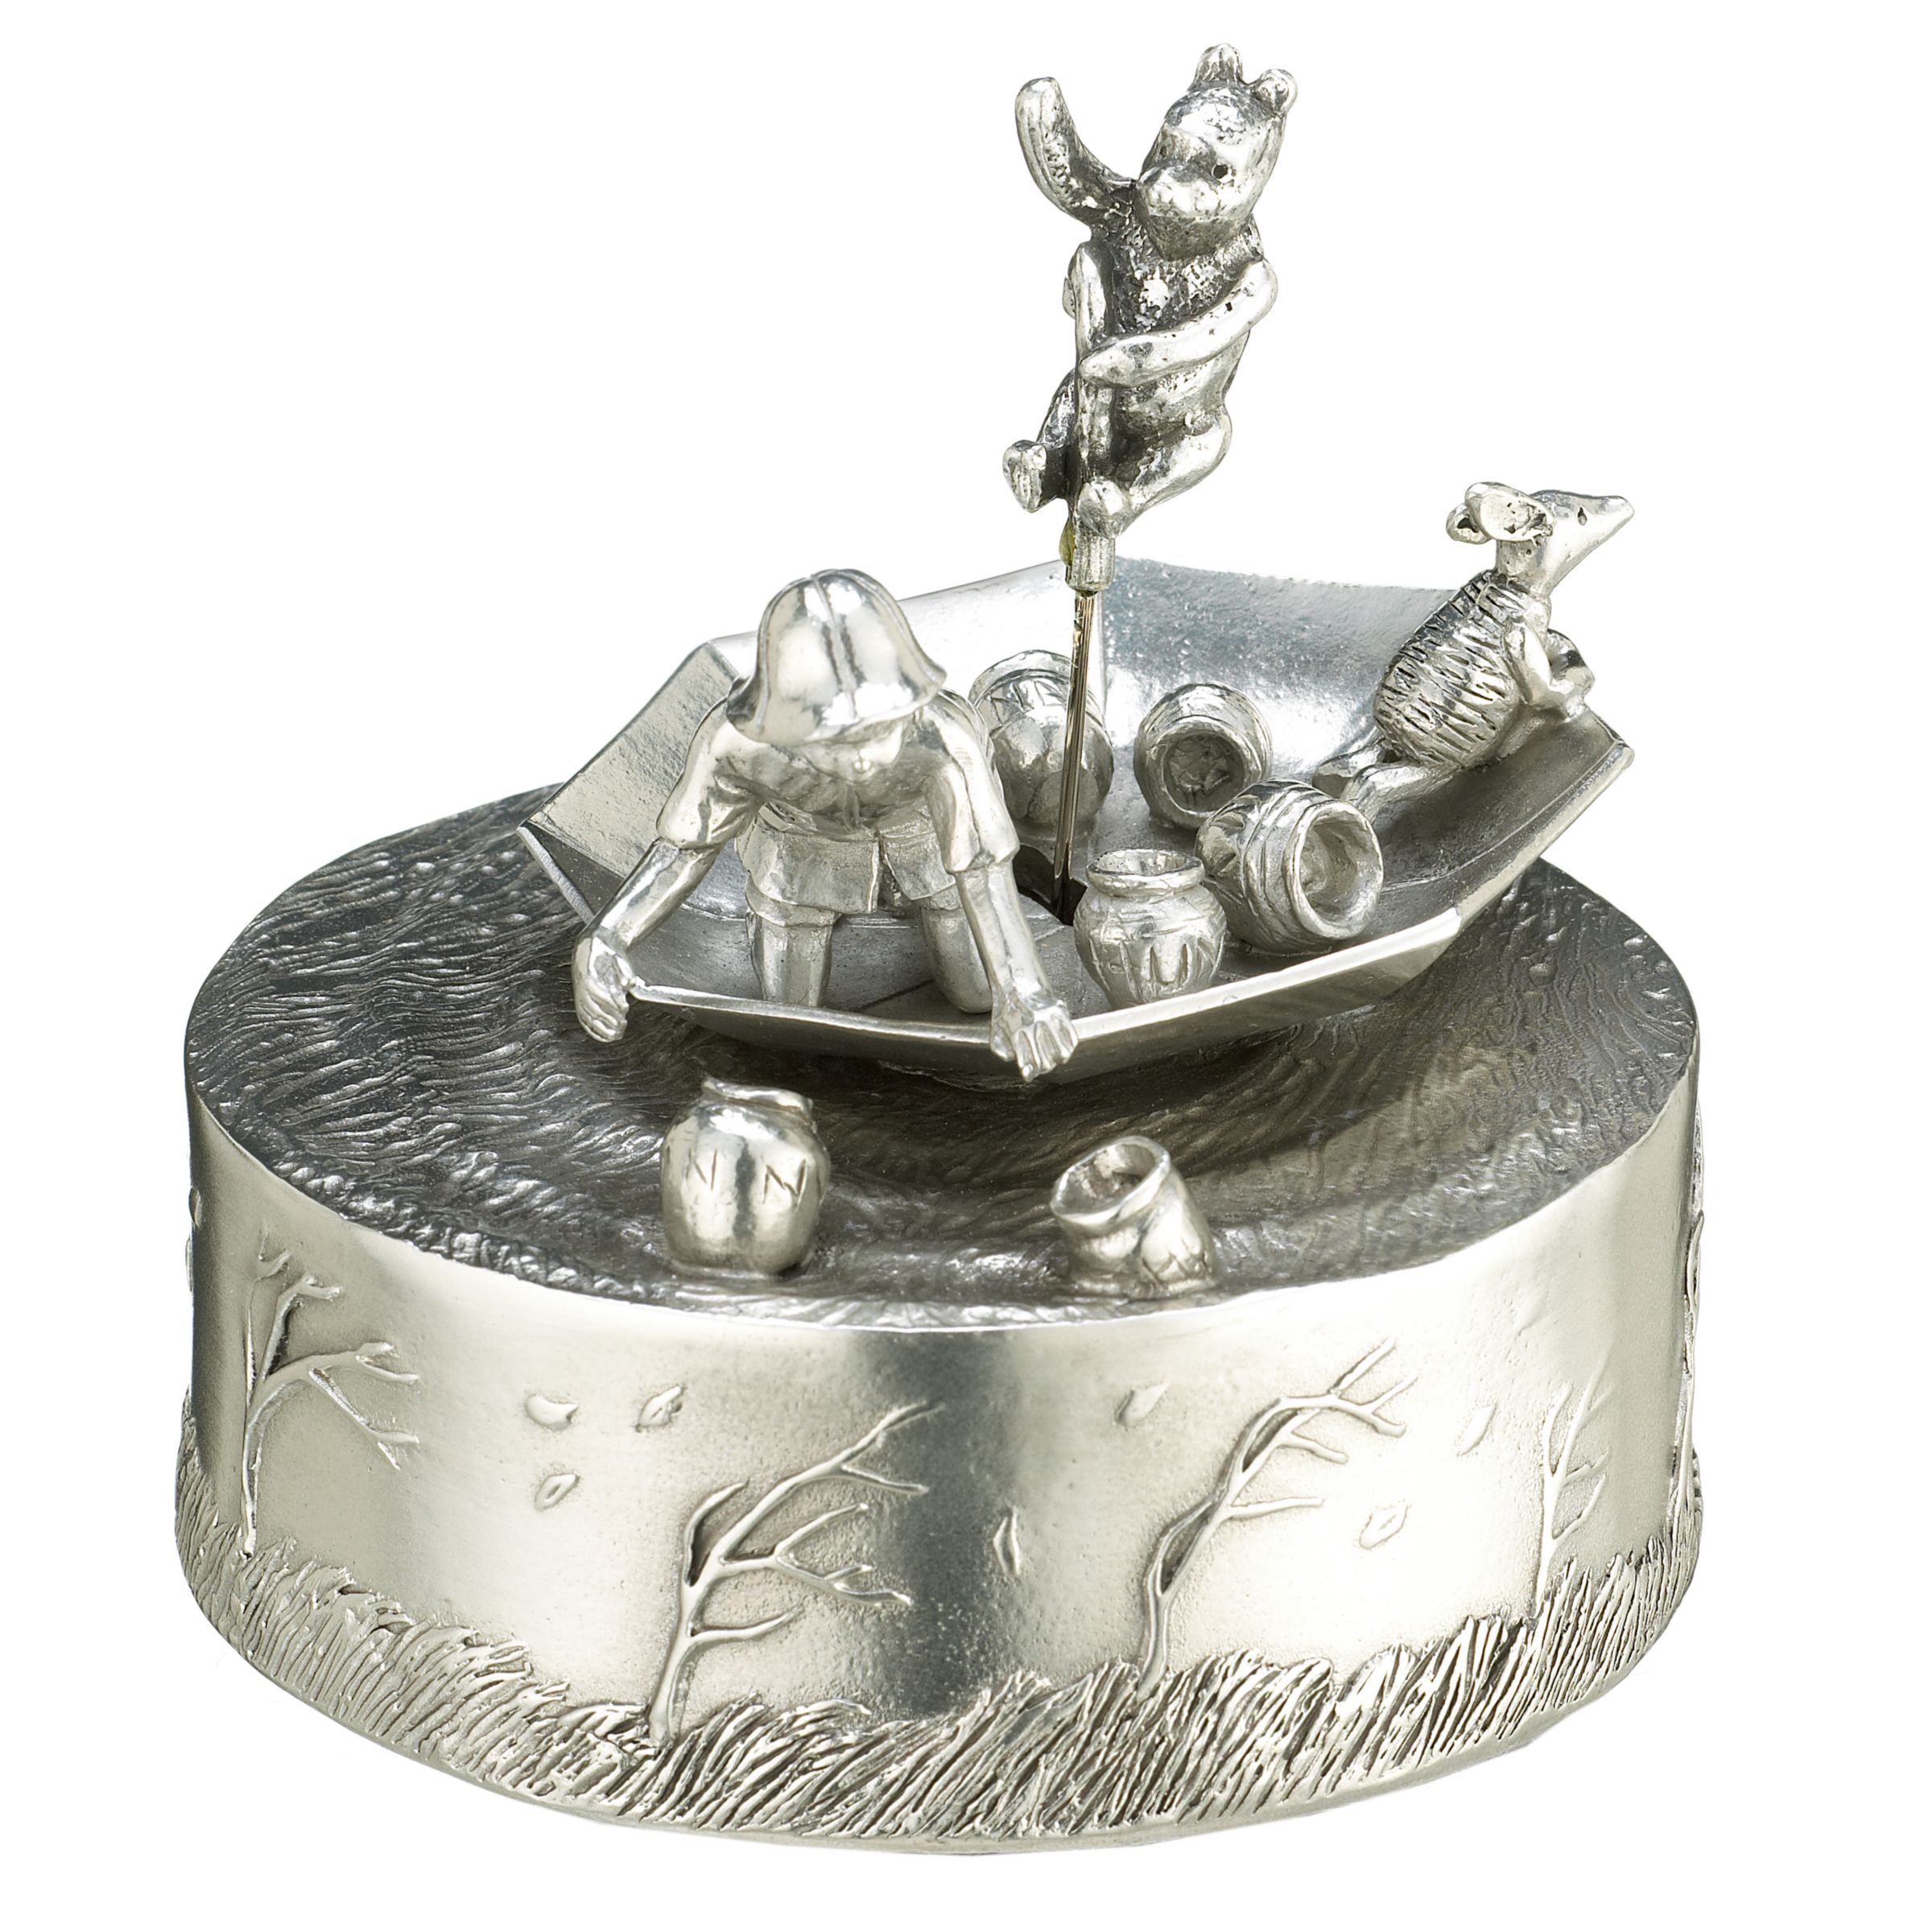 Blustery Day Musical Pewter Carousel